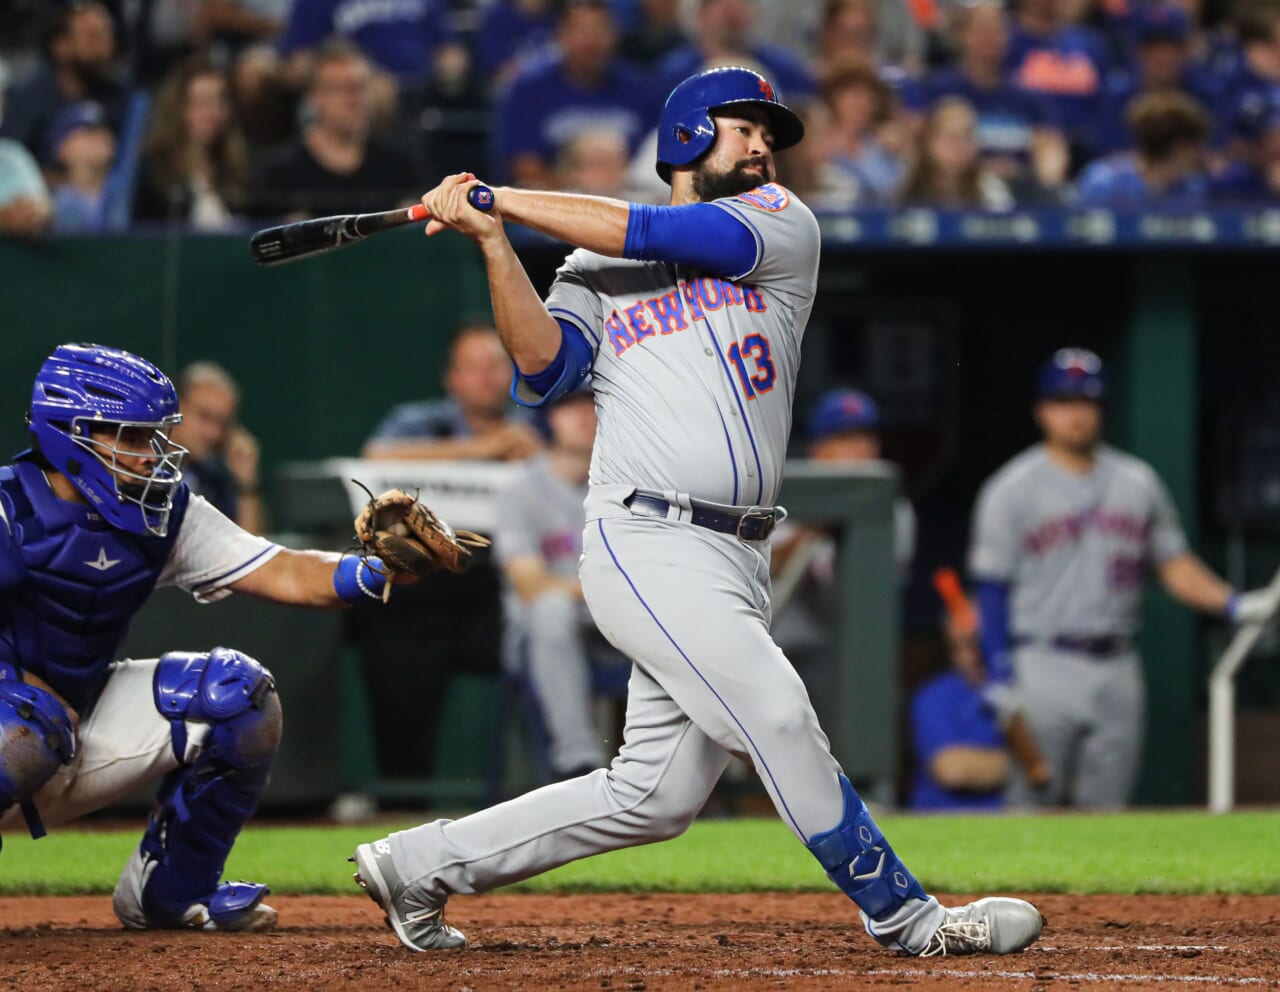 New York Mets: The emergence of Luis Guillorme